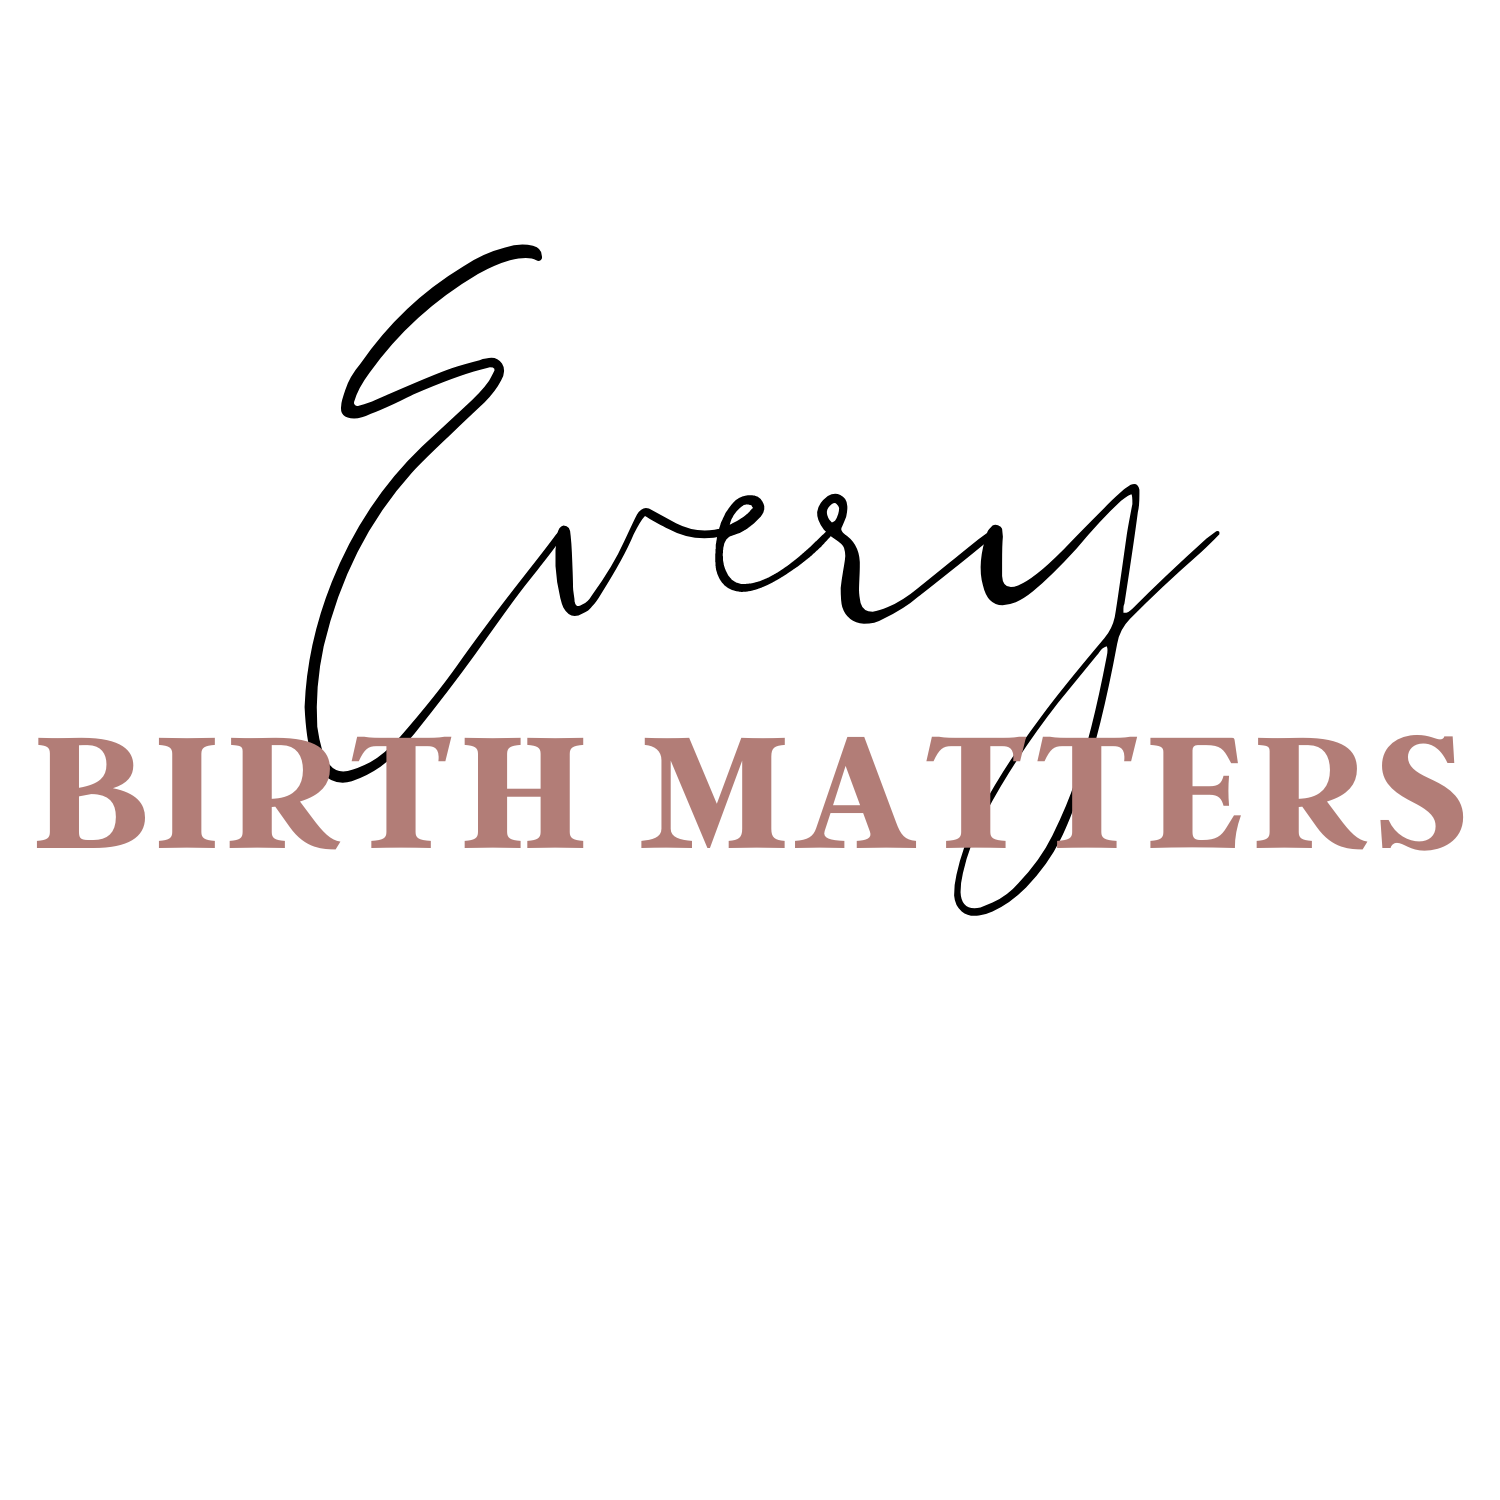 Natural Childbirth Classes: Every Birth Matters